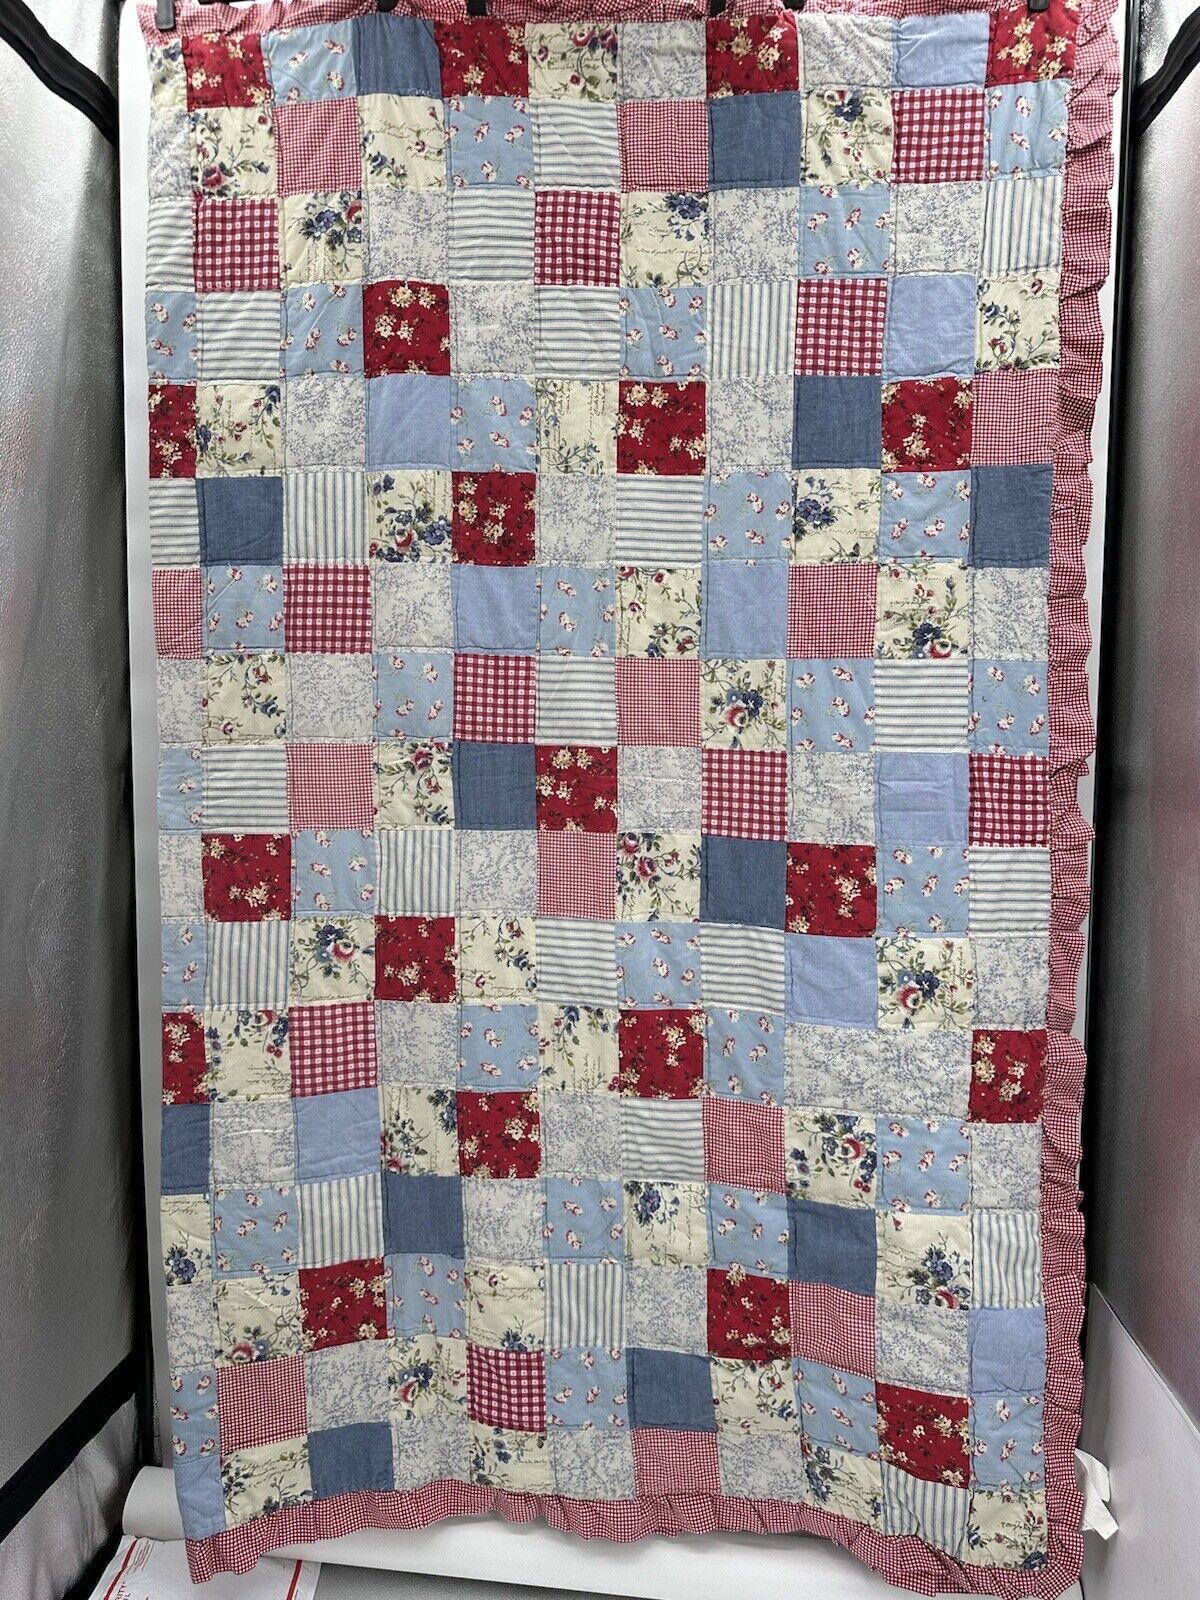 Vintage Gingham Rufflle Quilt GVC 72 X 86” Handstitched. Reds/Blues/ White